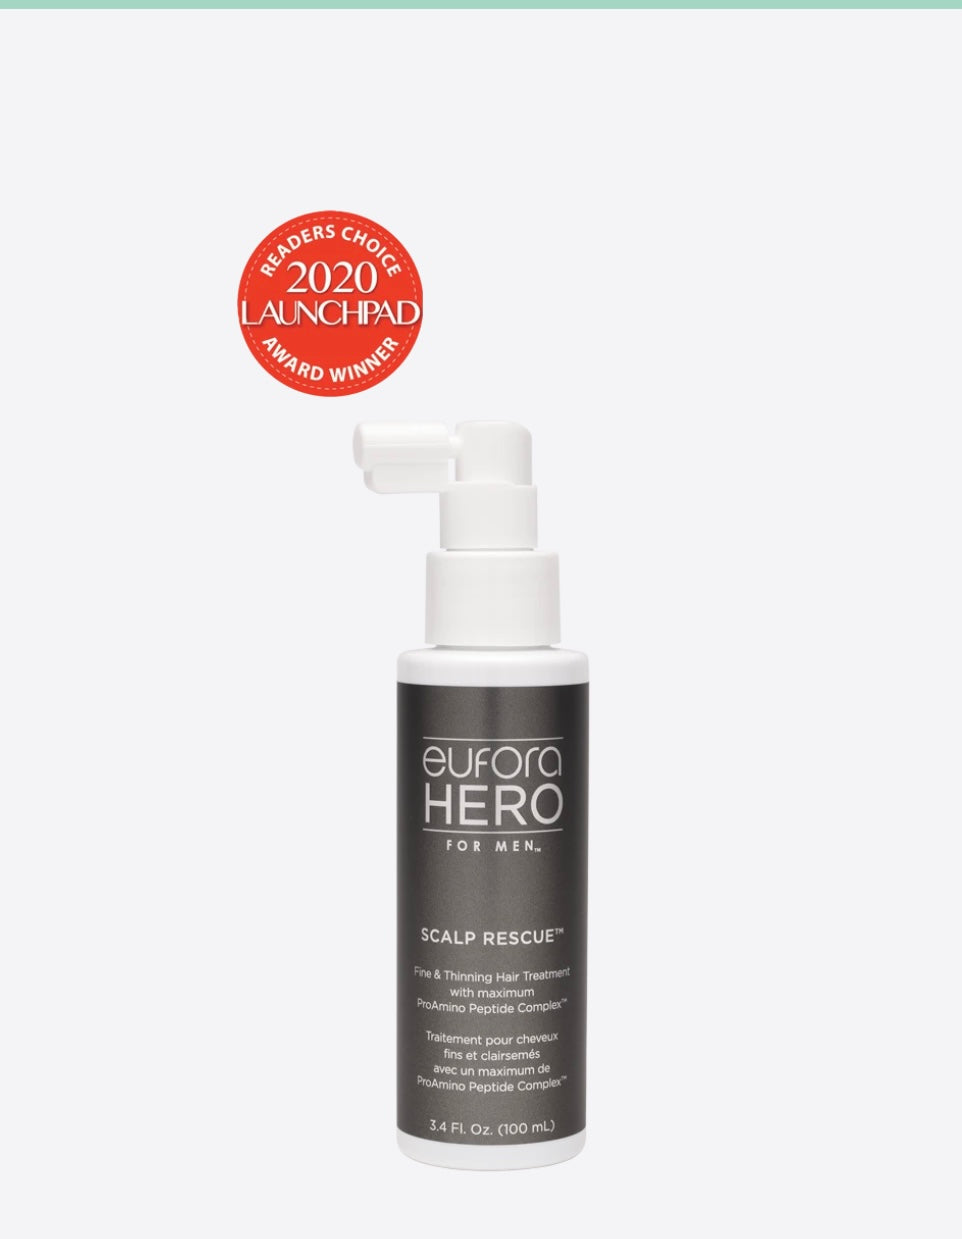 Eufora Hero for Men Scalp Rescue. Innovative treatment for fine and thinning hair. Delivers a maximum dosage of Eufora exclusive ProAmino Peptide Complex TM to soothe irritation, strengthen and condition hair and scalp for optimum hair health and retention.